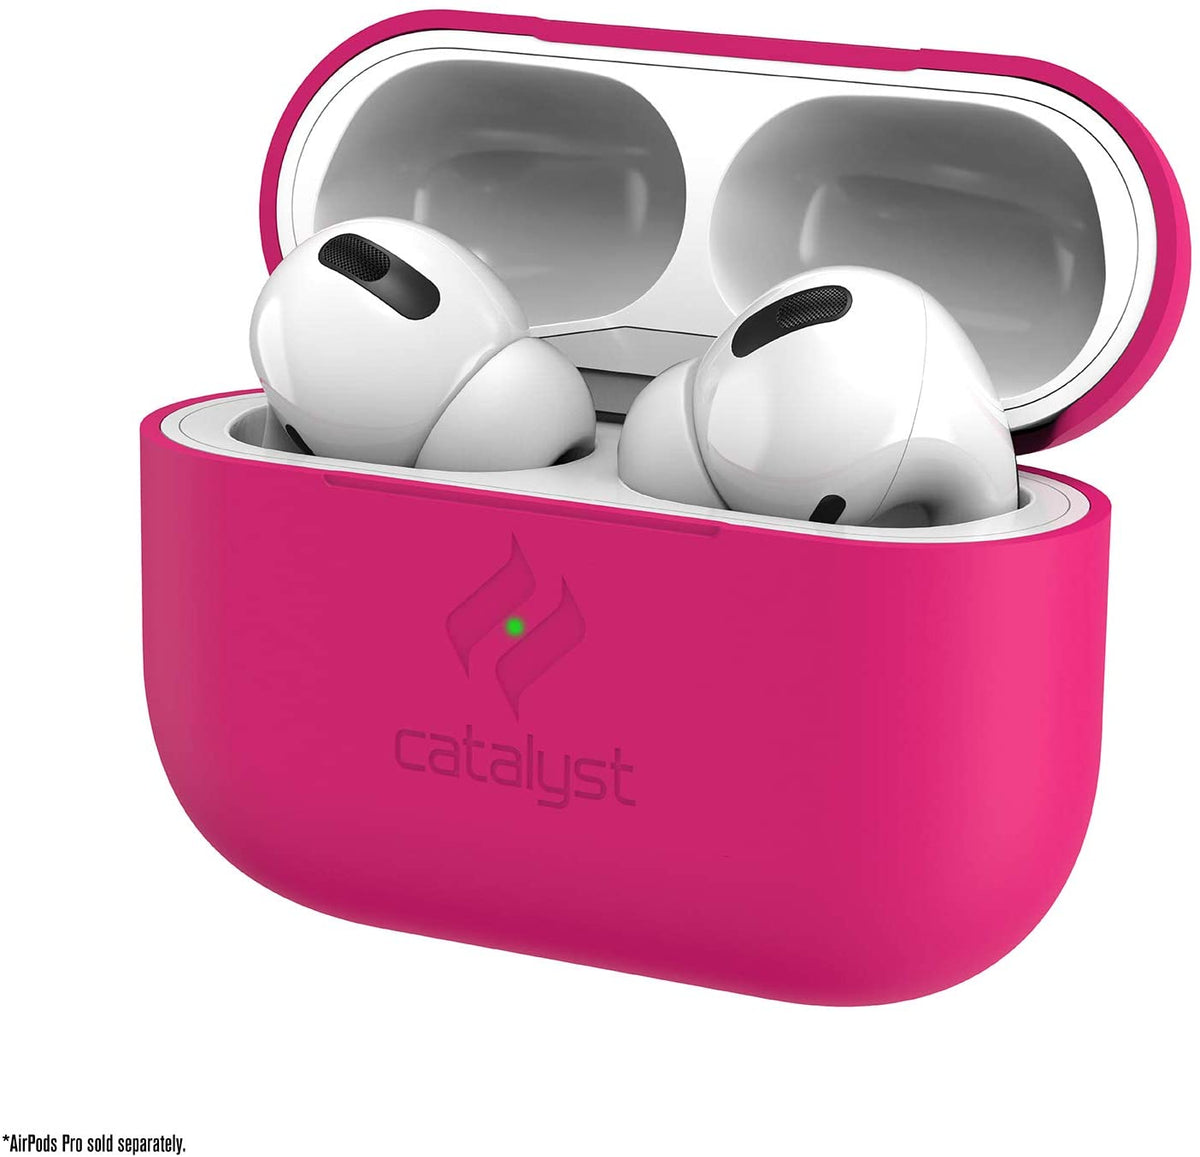 CATALYST Slim Case for AirPods Pro - Neon Pink